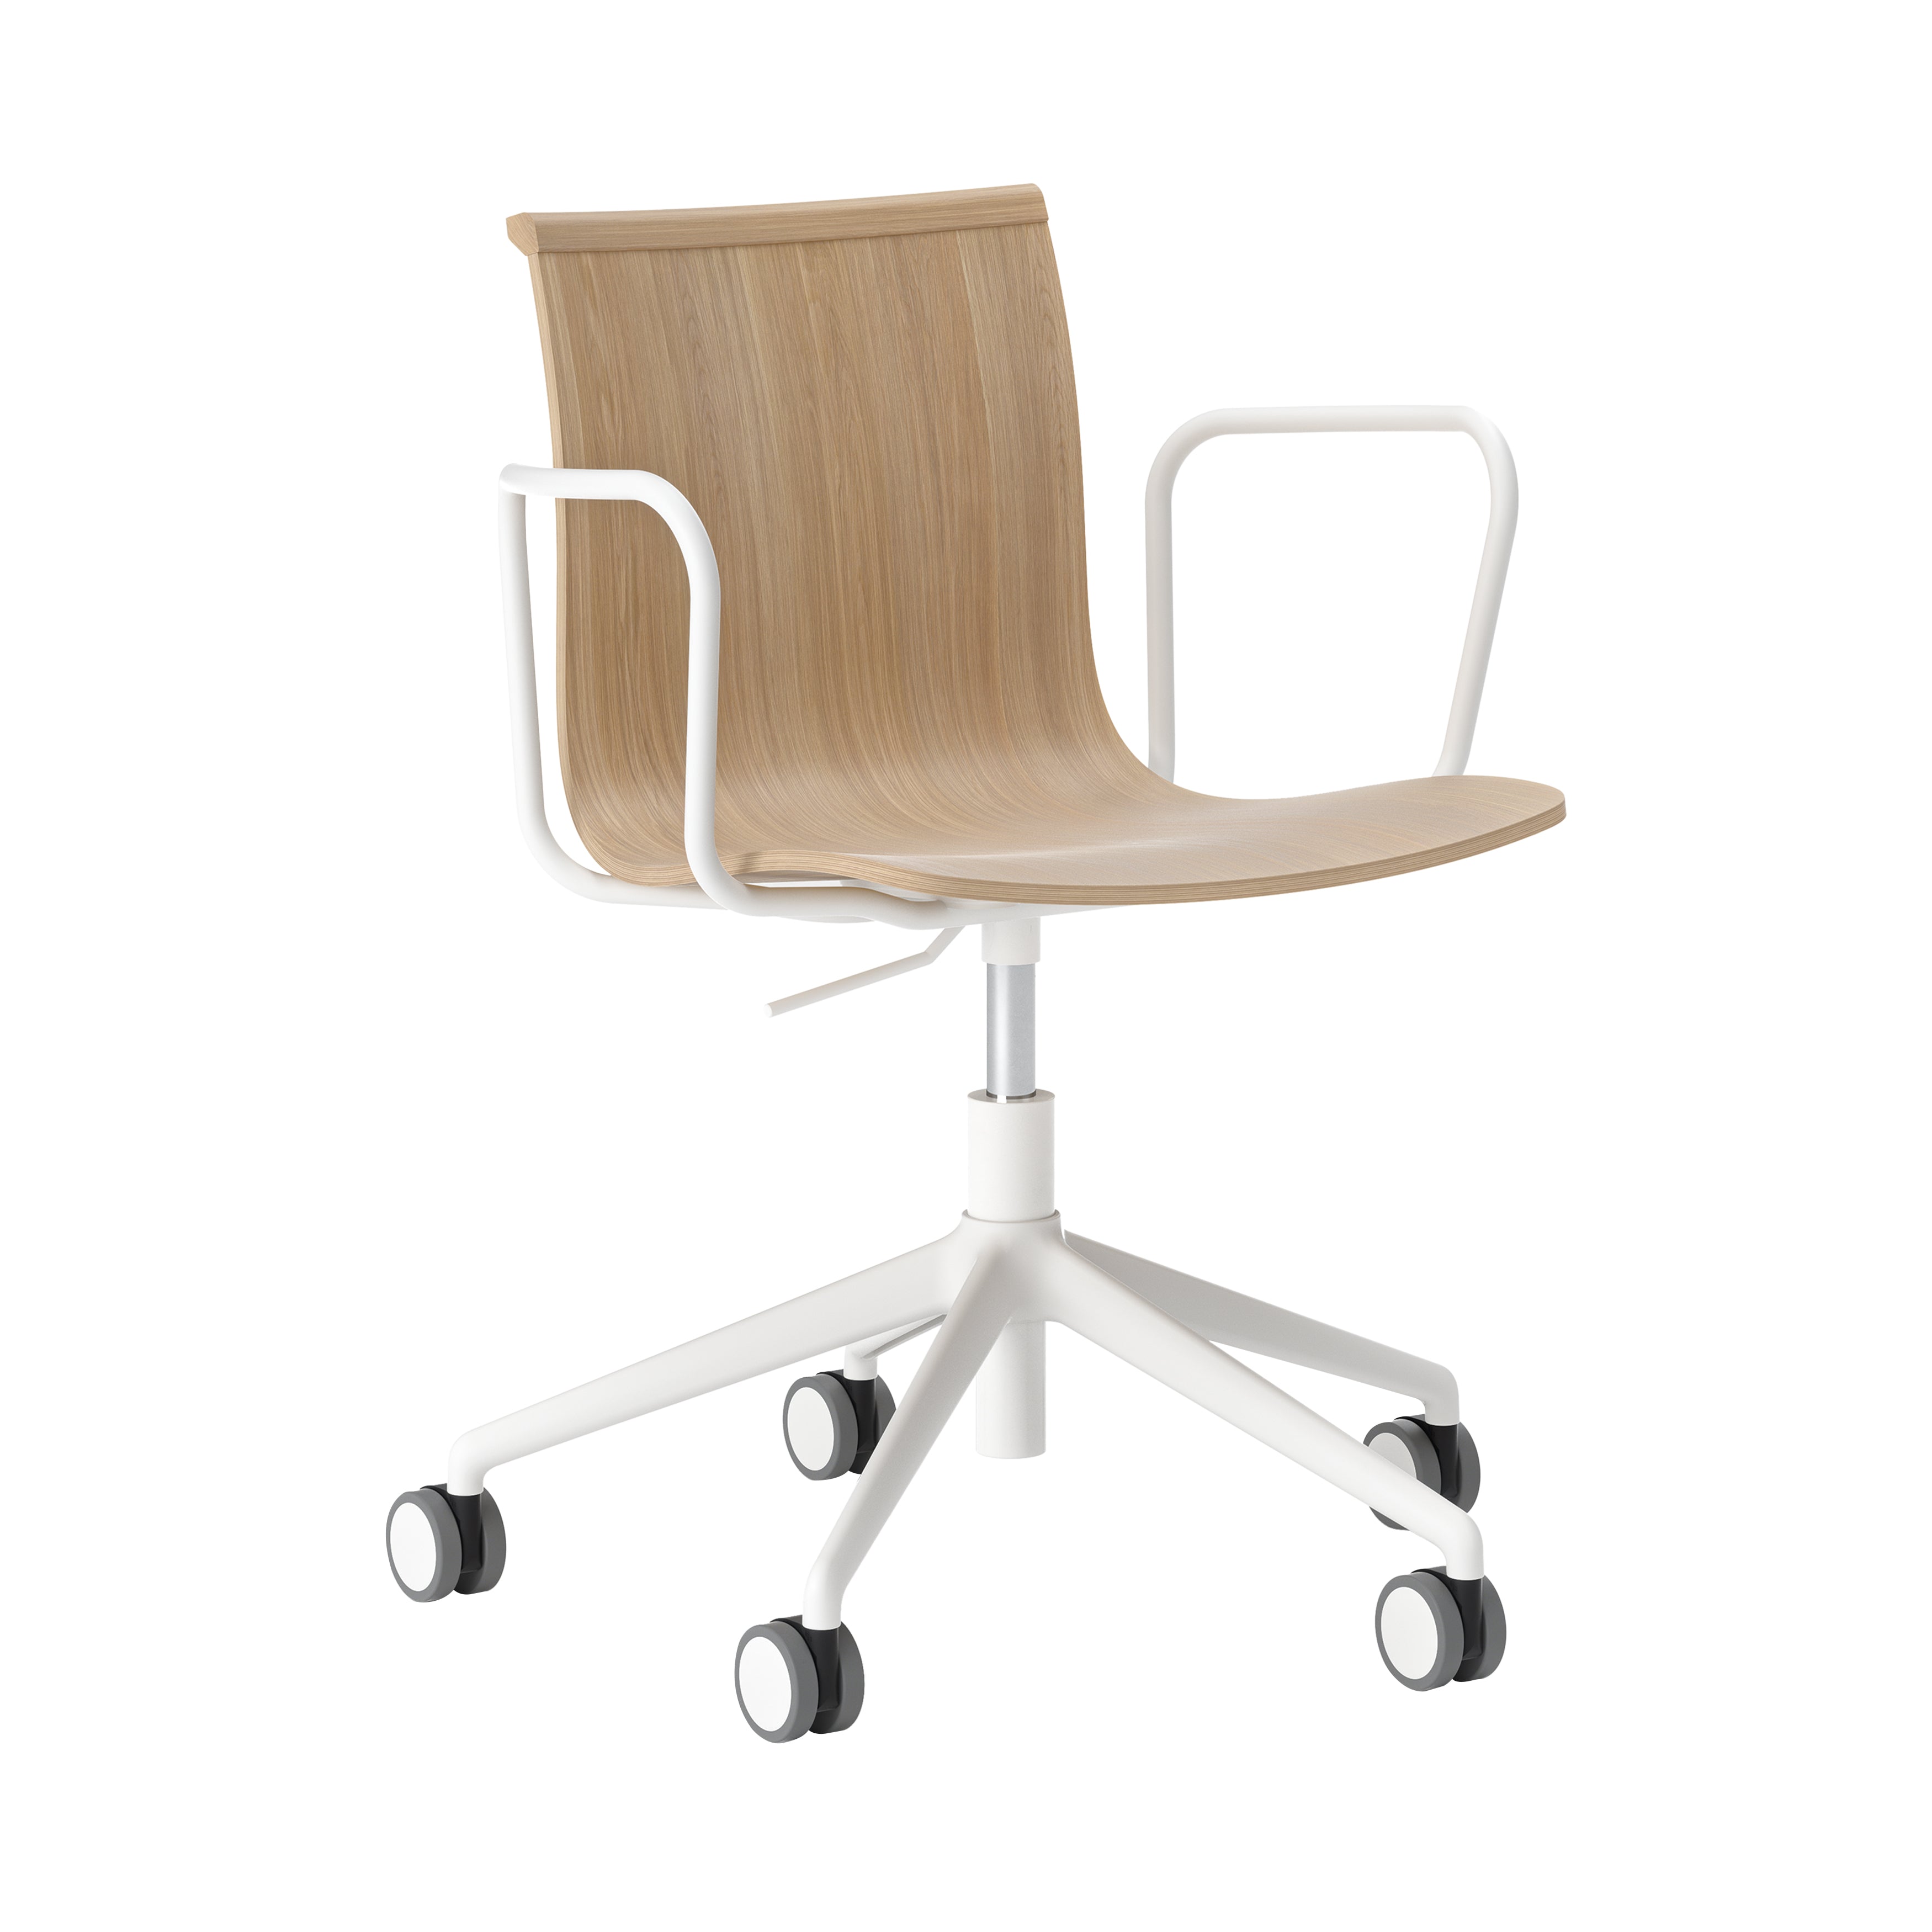 Serif Chair: 5 Star Base with Armrests + White + Natural Oak